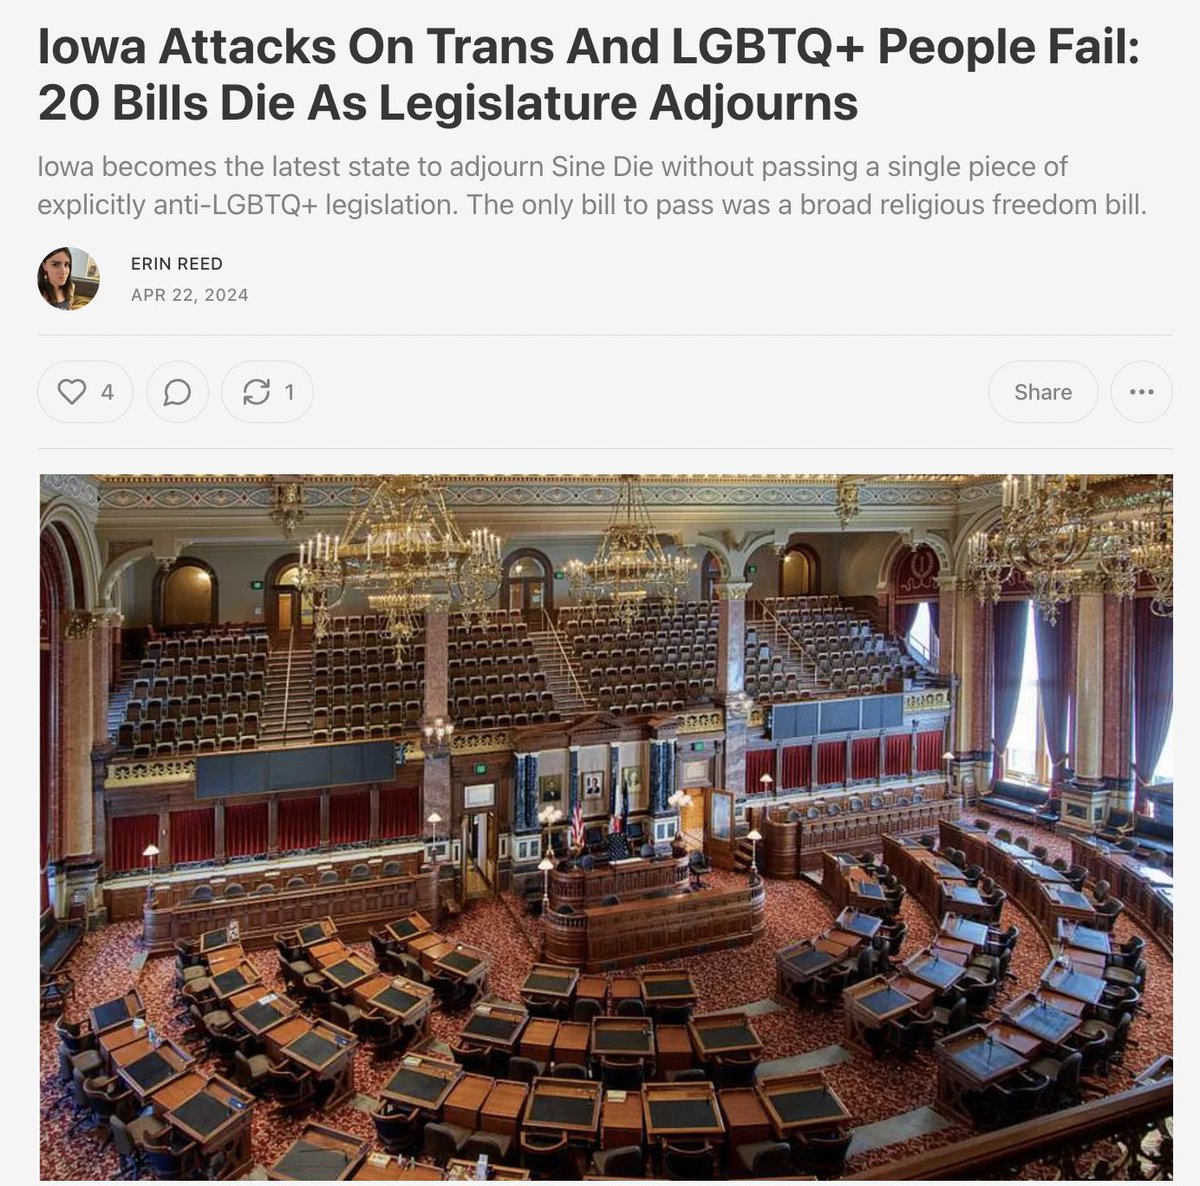 1. Major victory in Iowa for trans and queer people. As the legislature adjourned Sine Die, every explicitly anti-LGBTQ+ bill has died - 20 in all. Even a last second amendment to a veterans benefit bill targeting trans people fialed. Subscribe to support my journalism.